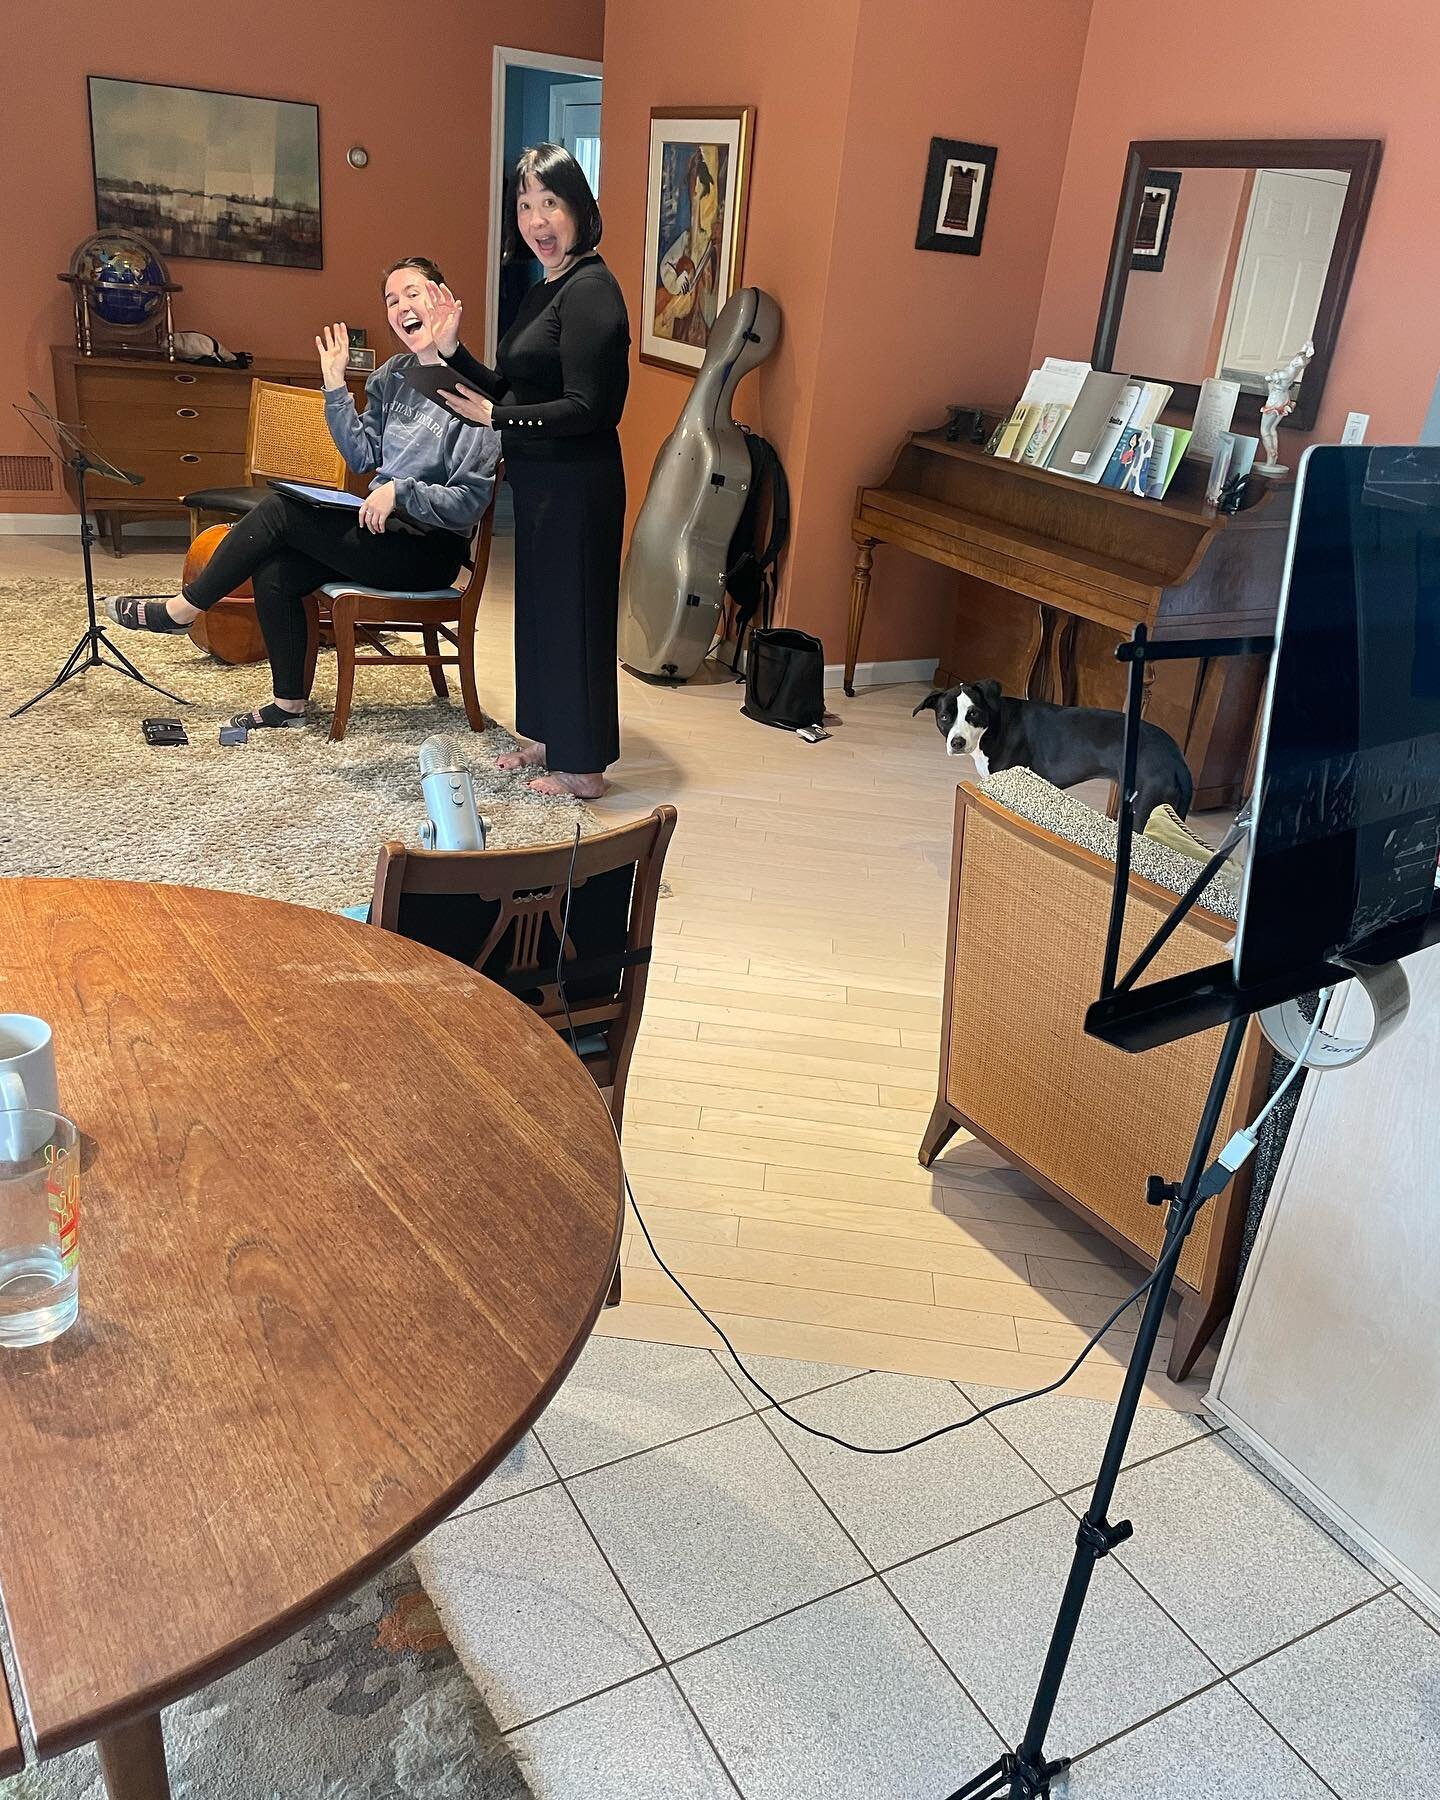 A little glimpse of our rehearsal today! We&rsquo;ve been working on short string quartet works by undergraduate composition students from @atbennington, in preparation for our residency there in May! The first steps are rehearsing and making first-r